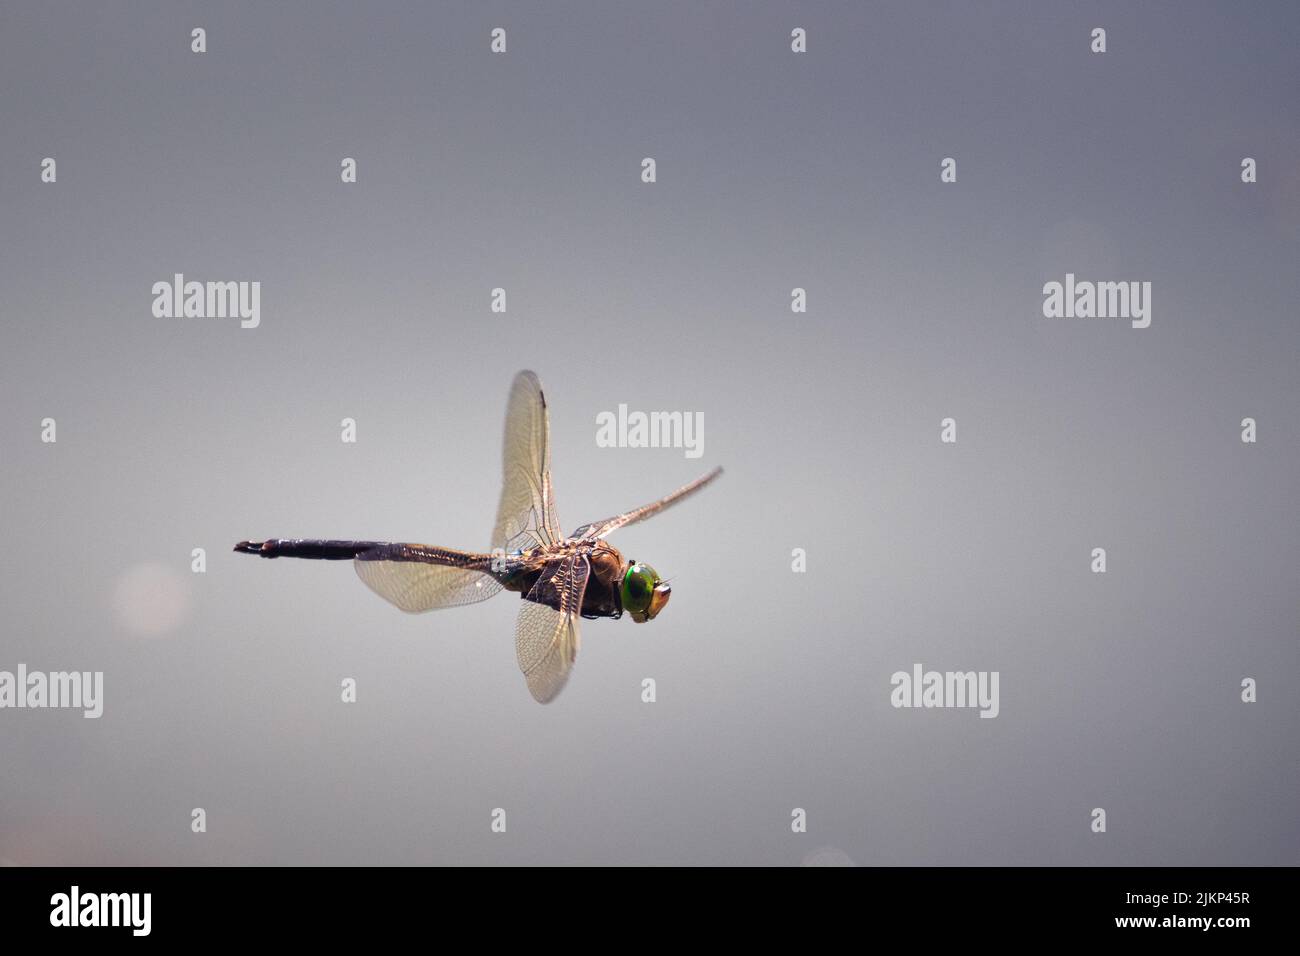 A dragonfly in the National Nature Reserve of La Petite Camargue, France Stock Photo